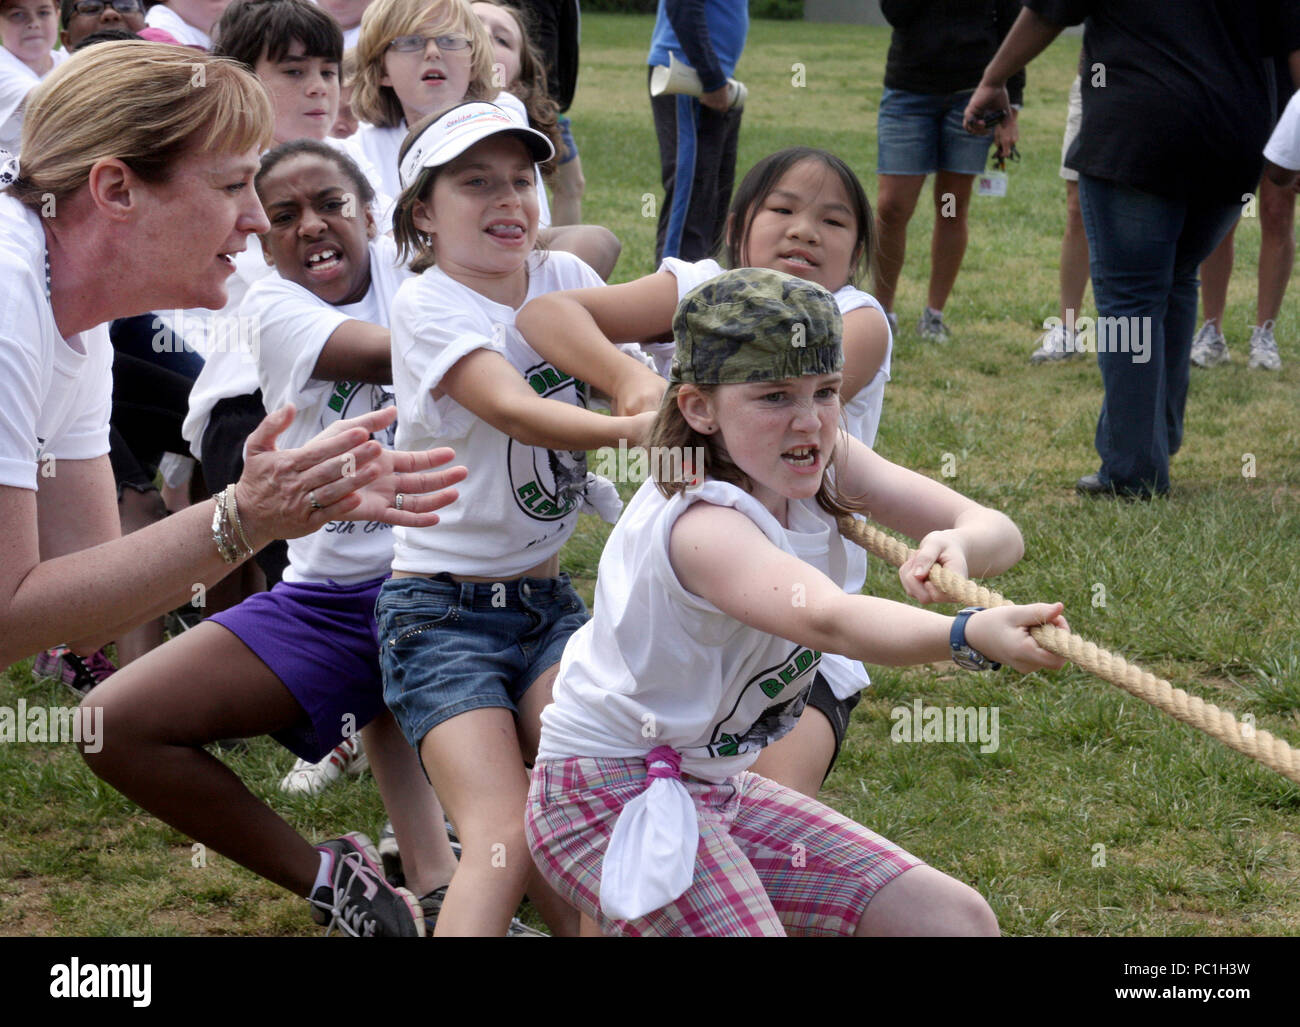 Children competing in a Tug of War challenge Stock Photo